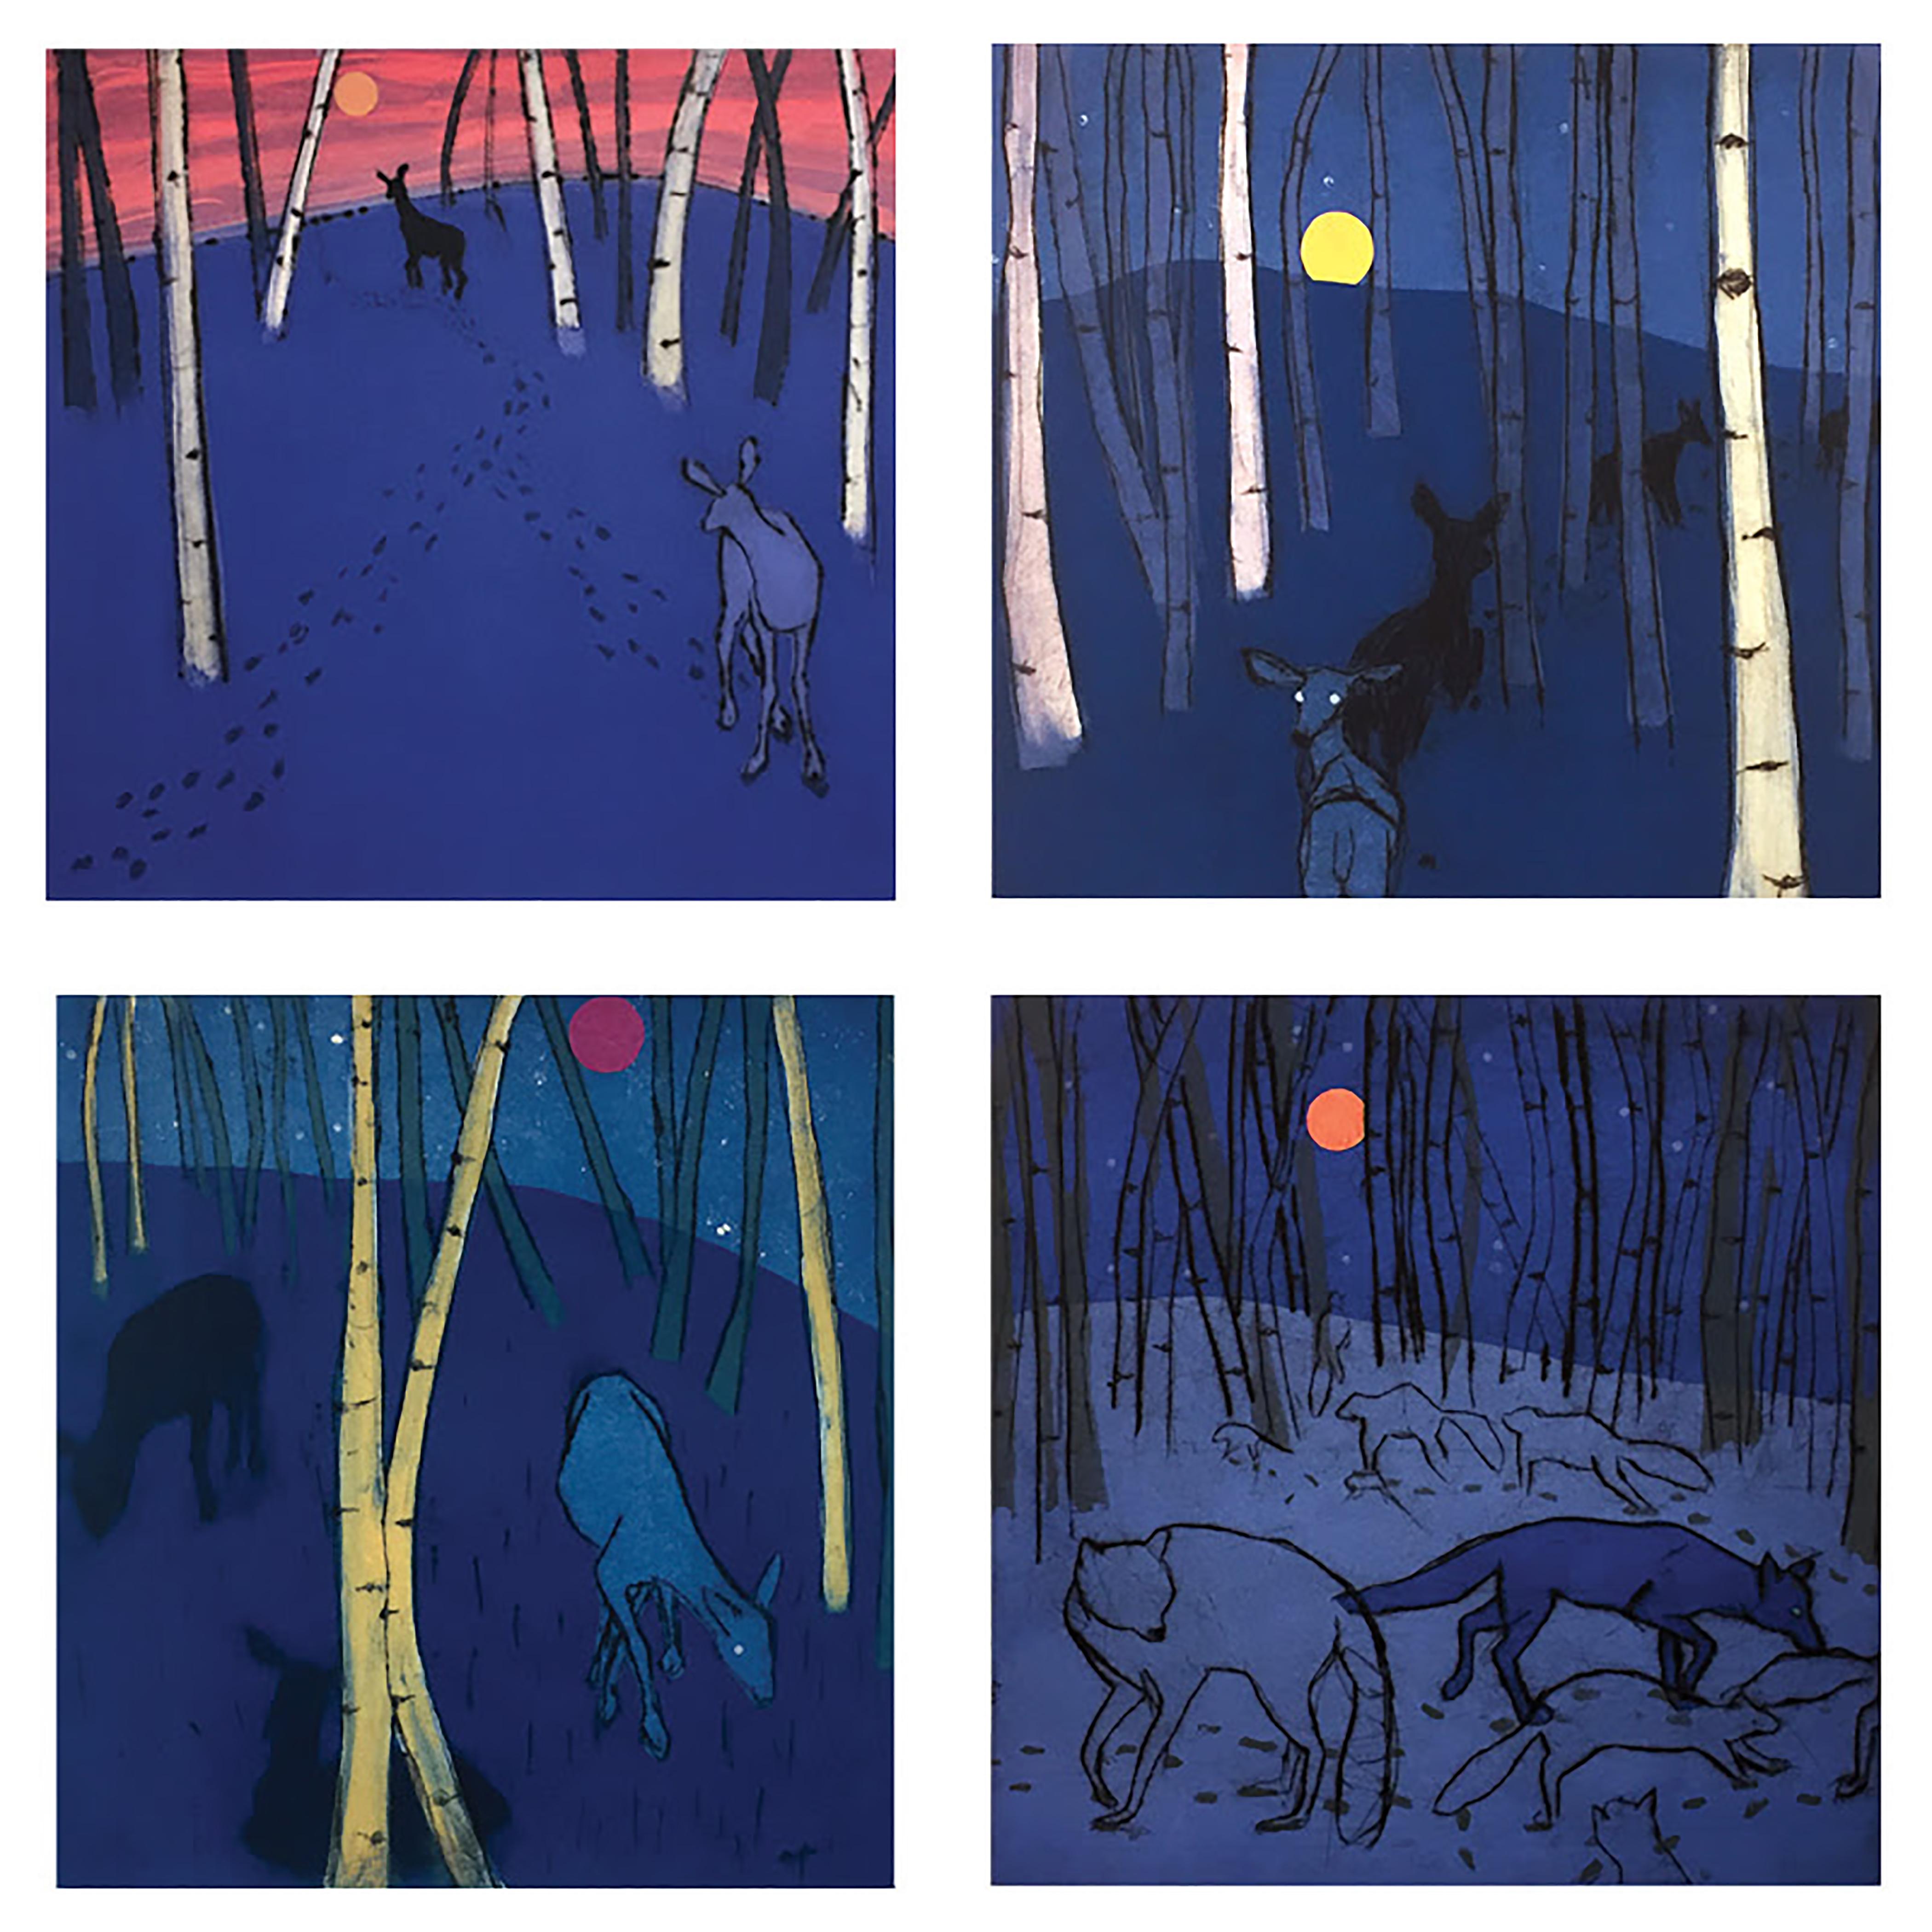 Moonrise 13/20 (night series, nocturne, aspen grove, deer, who's there?, blues) - Gray Animal Print by Paula Schuette Kraemer